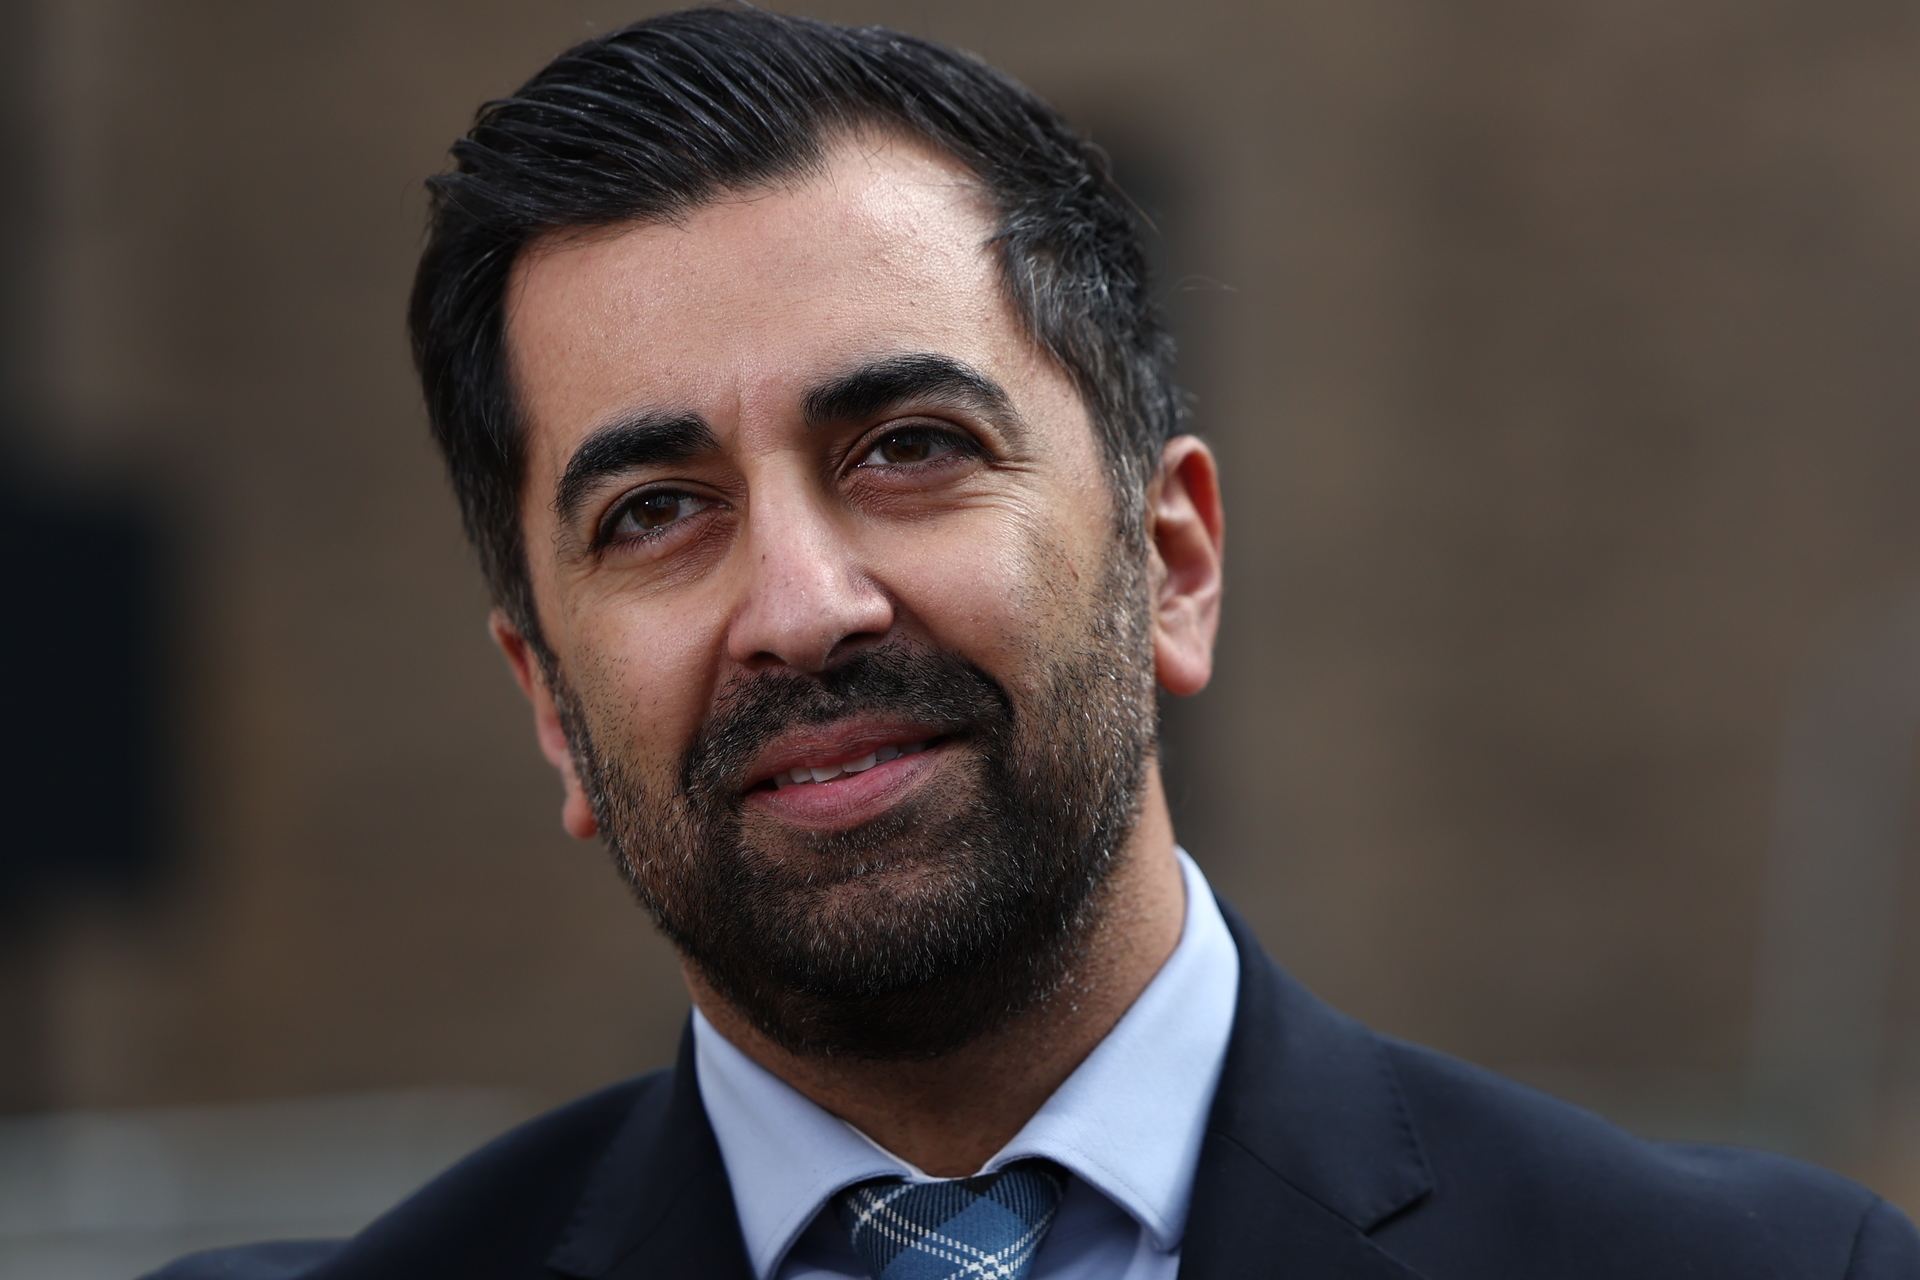 DUNDEE, SCOTLAND - APRIL 26: Scotland's First Minister Humza Yousaf speaks to the media during a visit to a housing development on April 26, 2024 in Dundee, Scotland. The first minister's appearance came as Scottish opposition parties called for a no confidence vote following the collapse of his power-sharing deal with the Green Party.